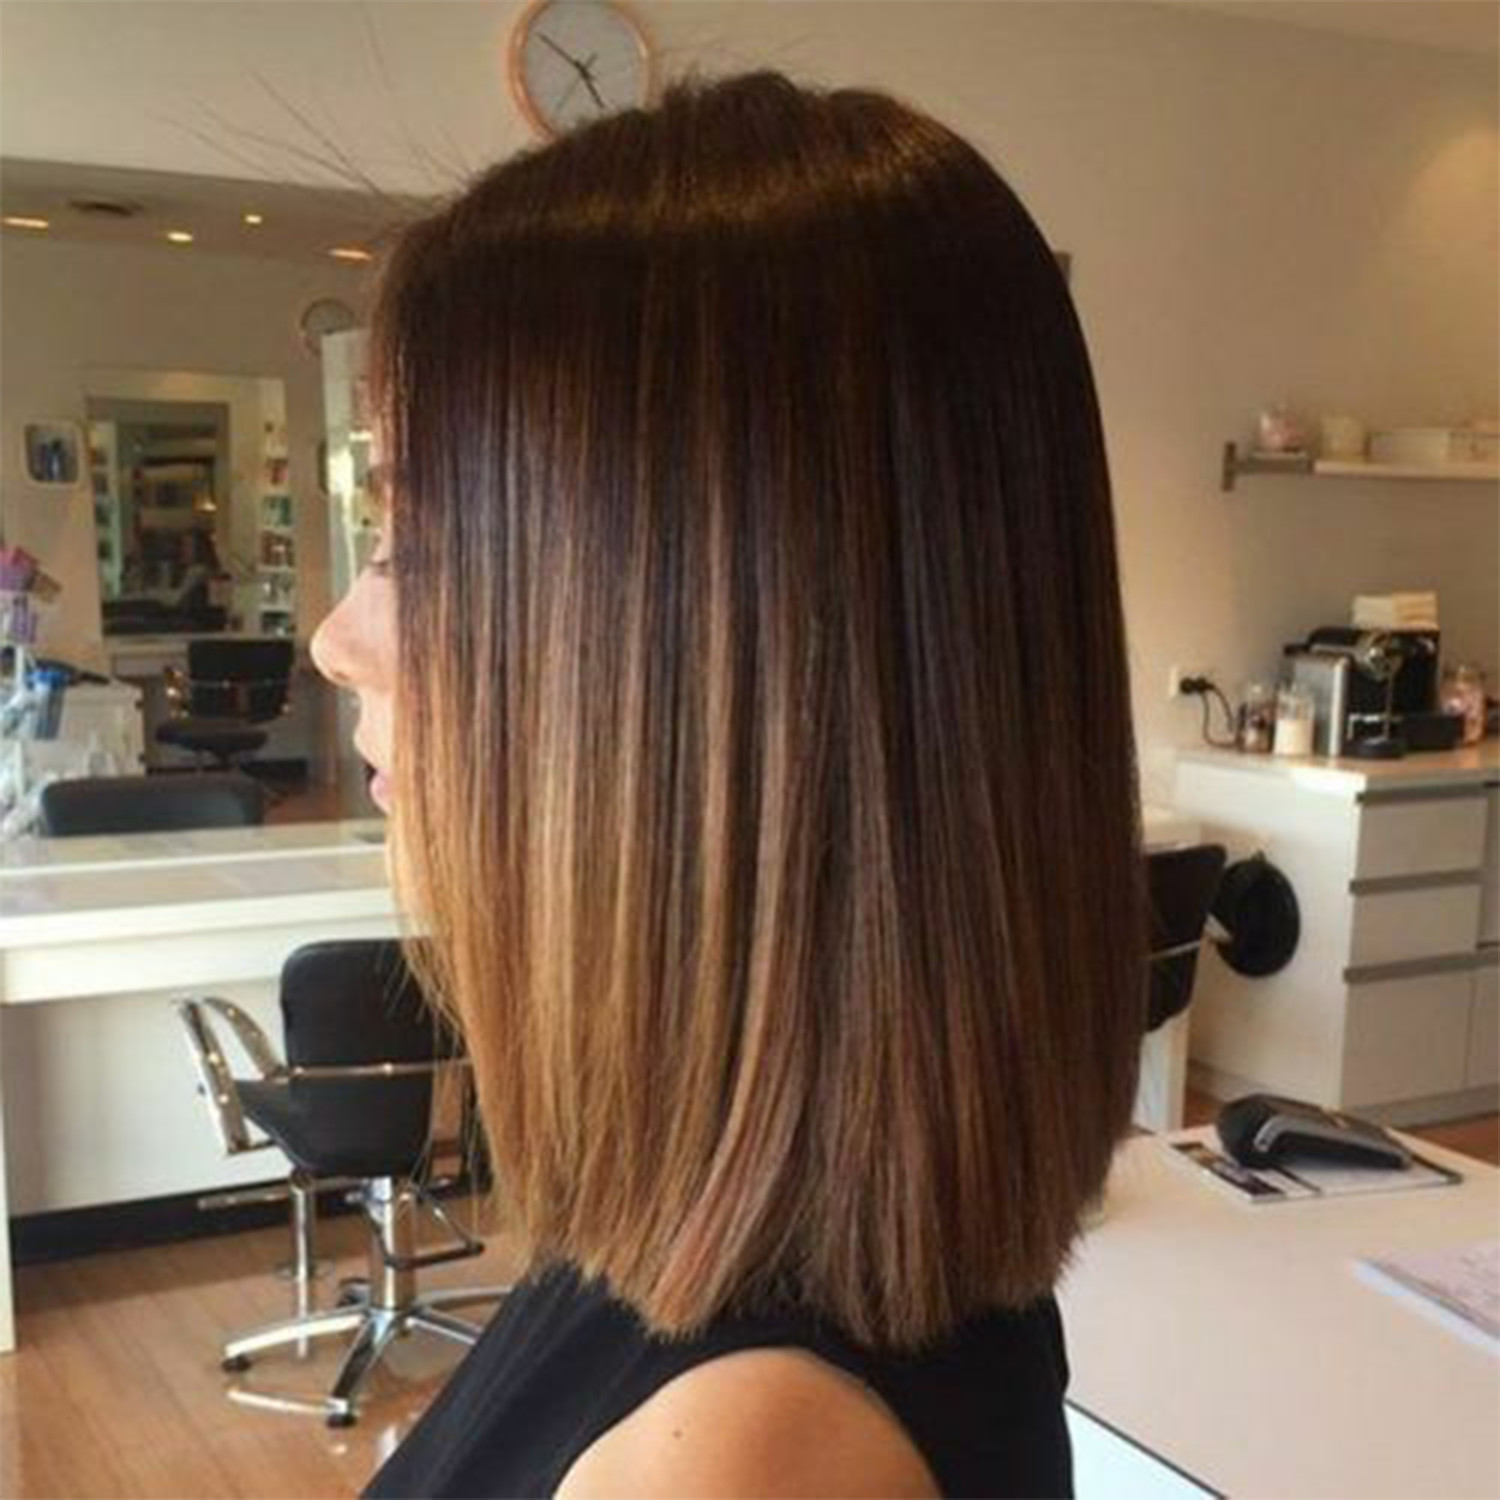 Hairstyle for women in Santa Monica suits your personality